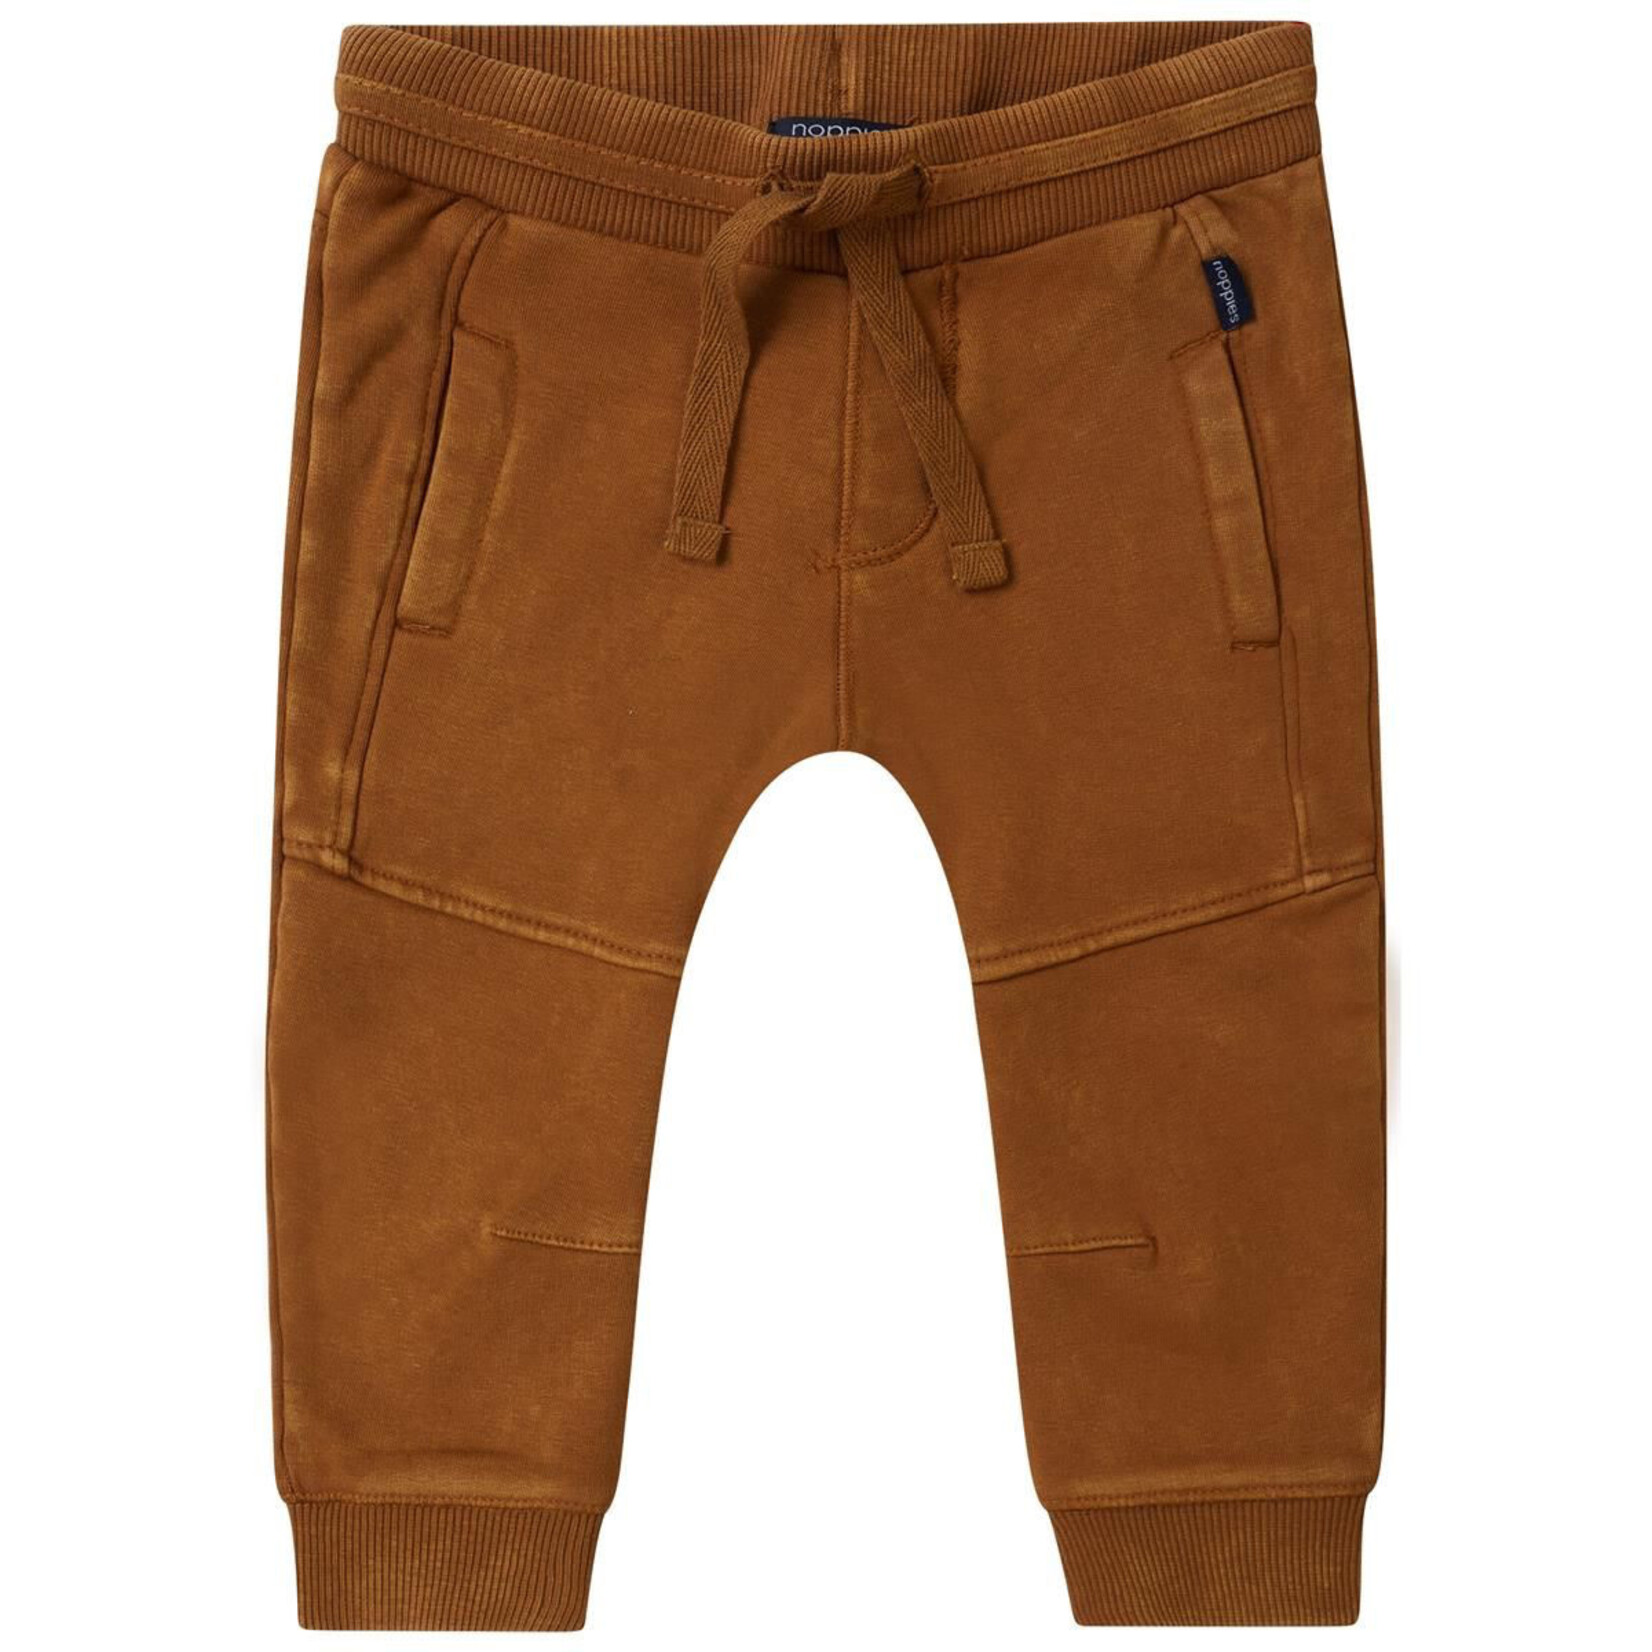 Noppies Noppies - Trooper Relaxed Fit Pants